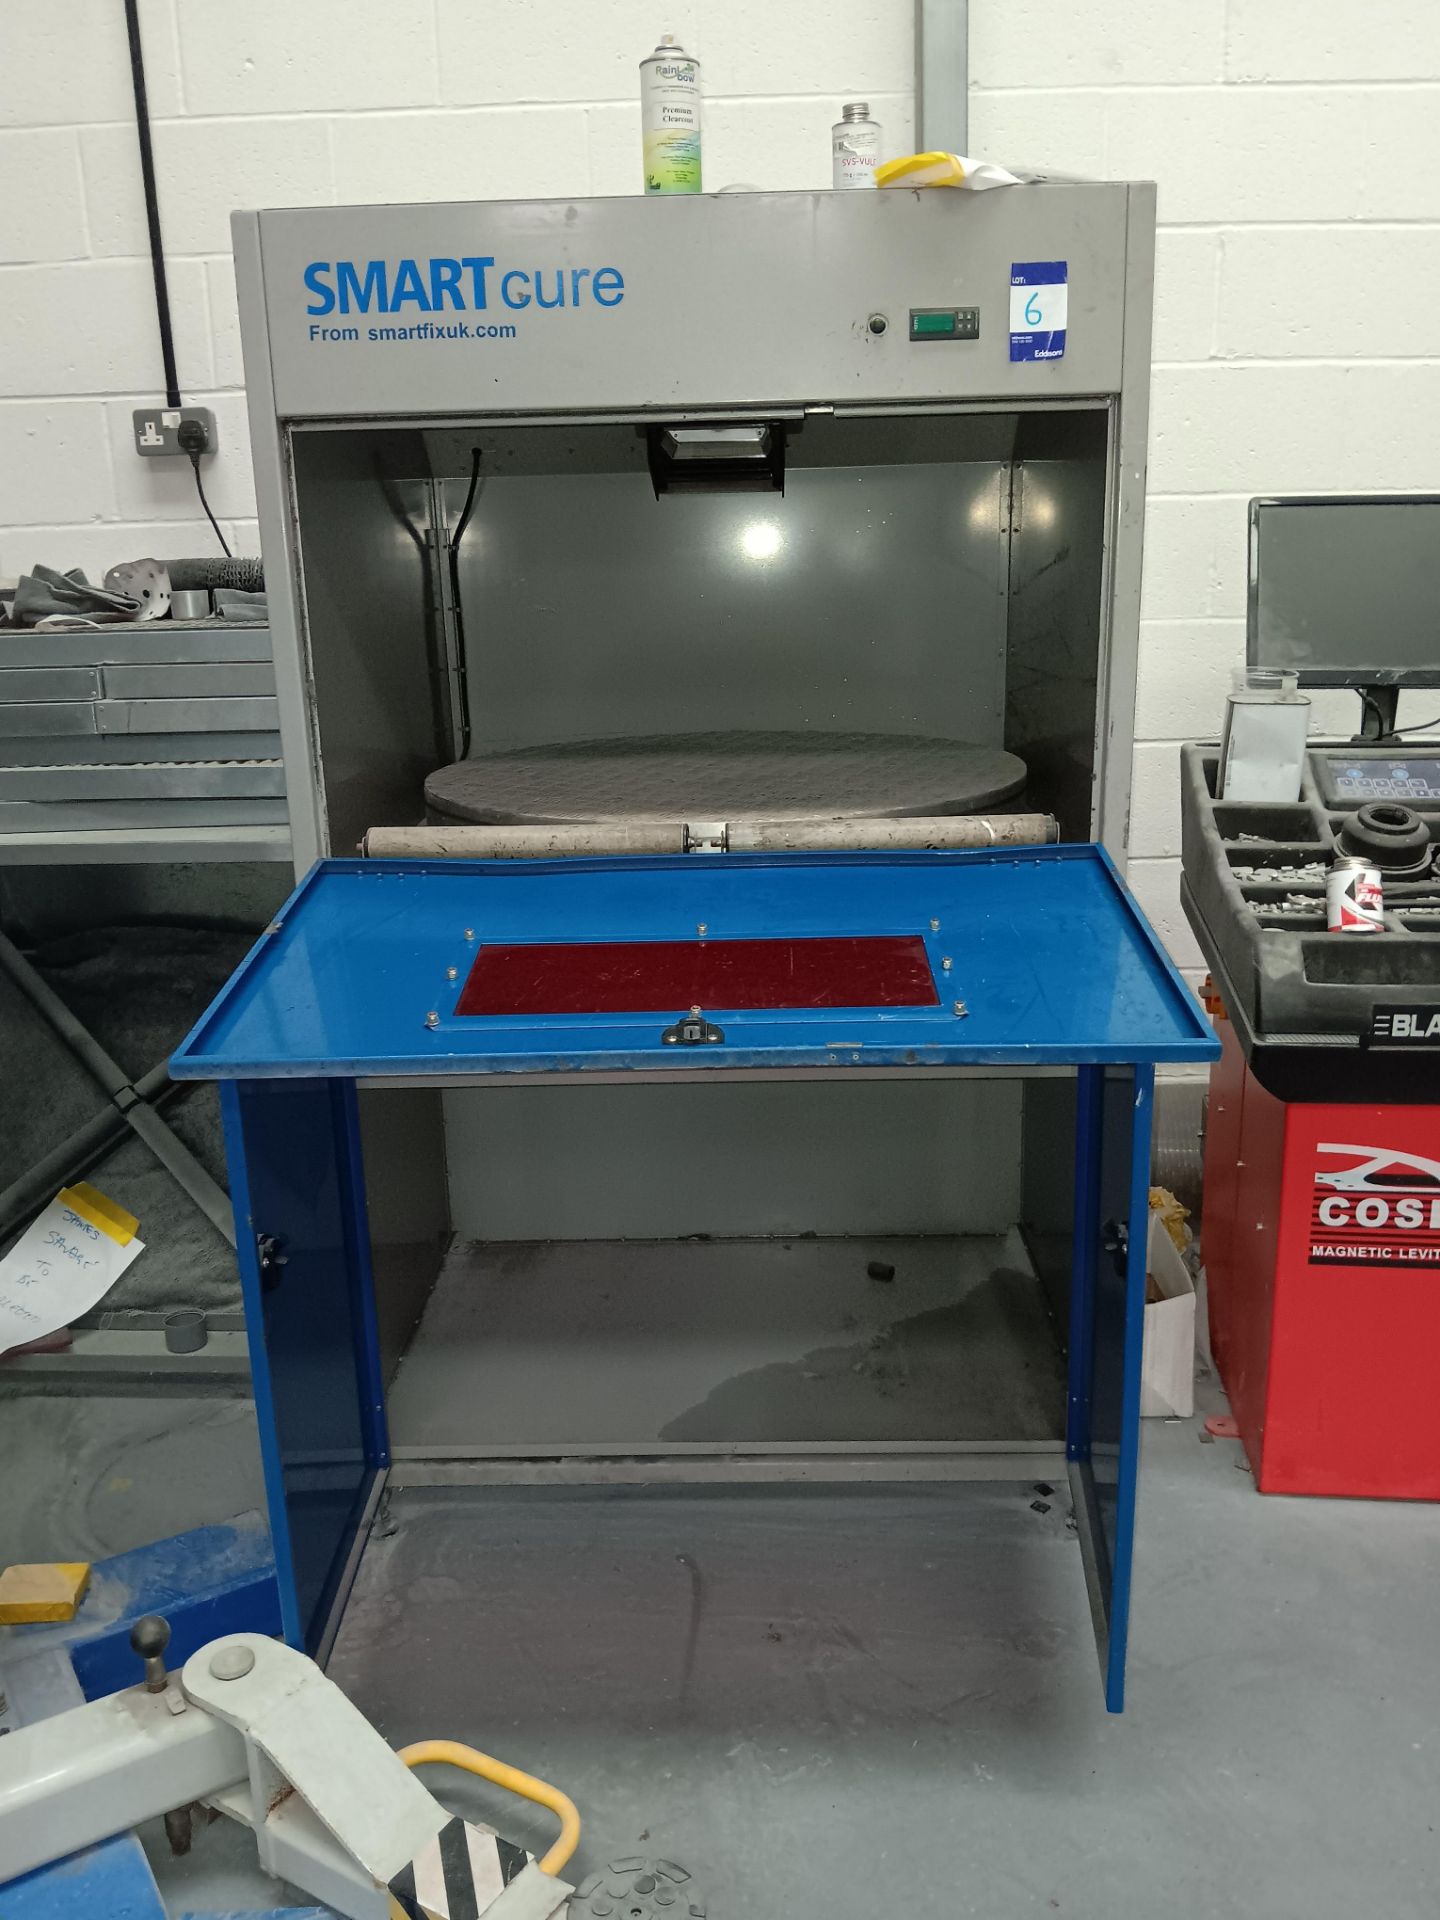 Smart Fix Smart Care Alloy Wheel UV Curing Oven 721 hours - Image 3 of 6